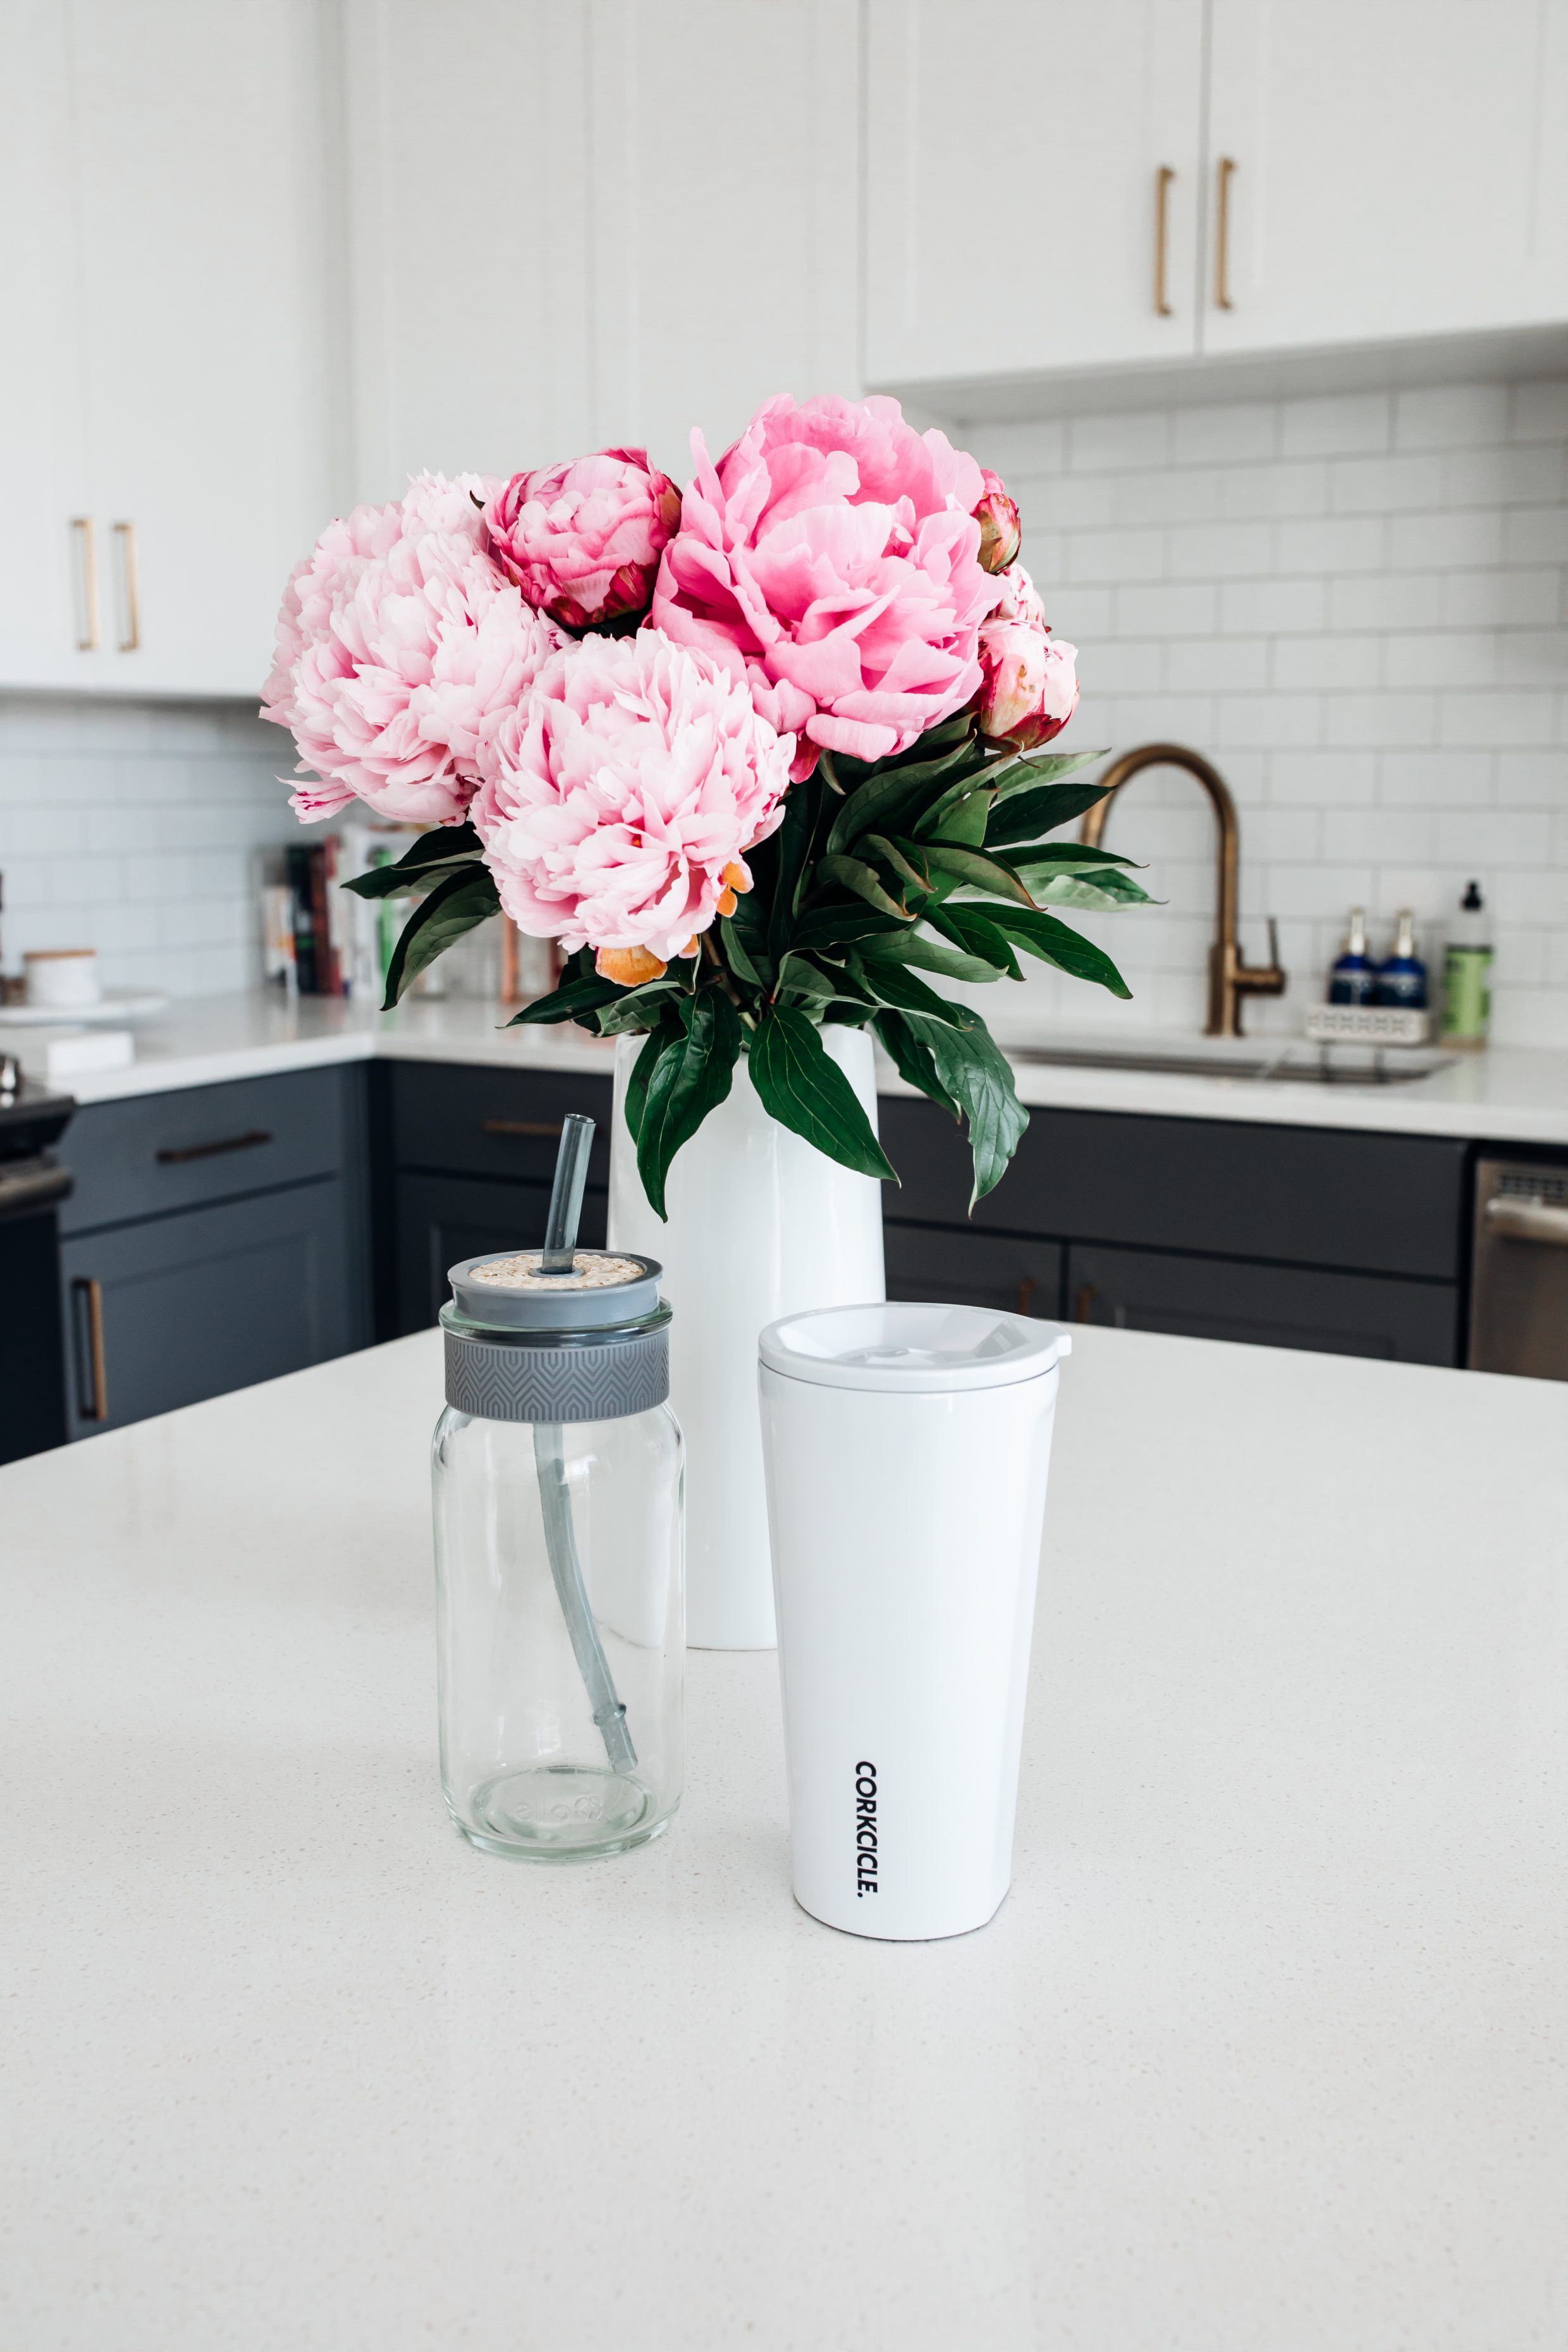 The best kitchen items include a glass tumbler and Corkicle insulated tumbler